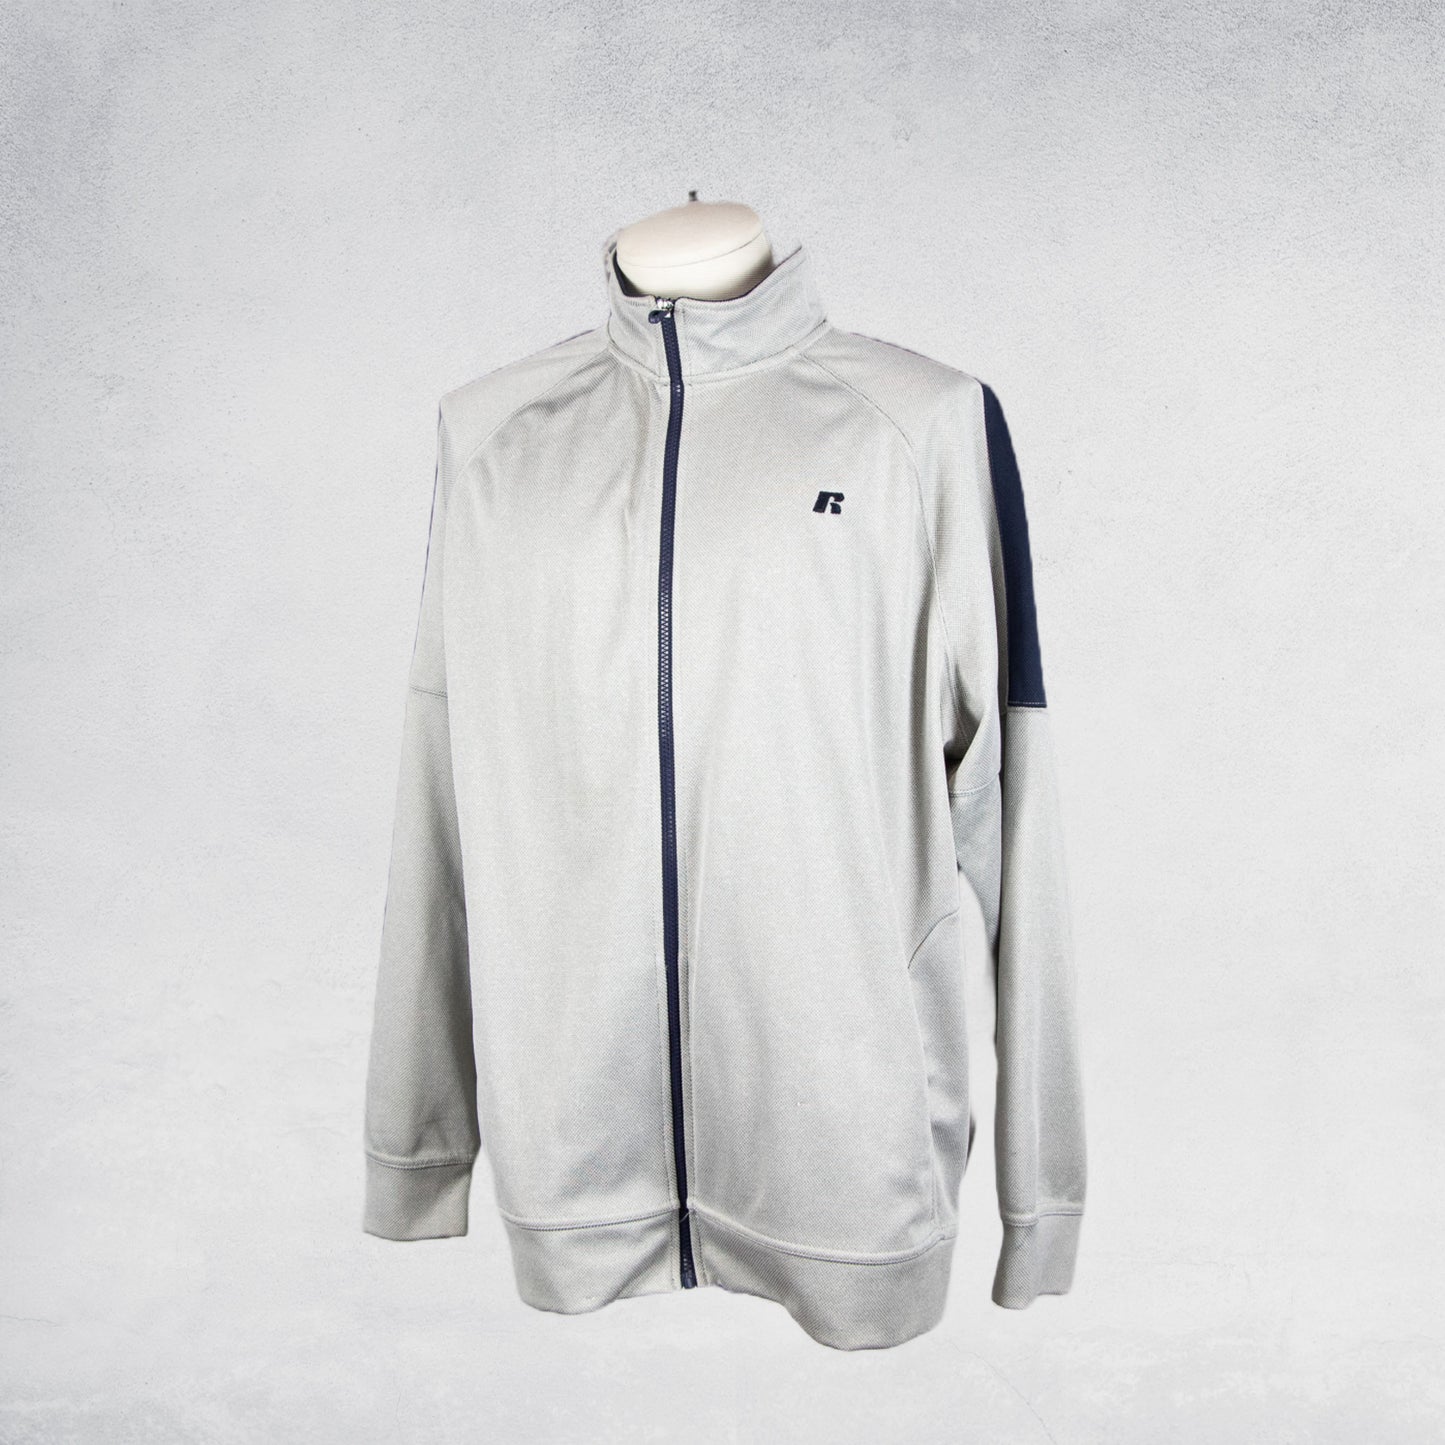 Russell Athletic Full Zip Jacket